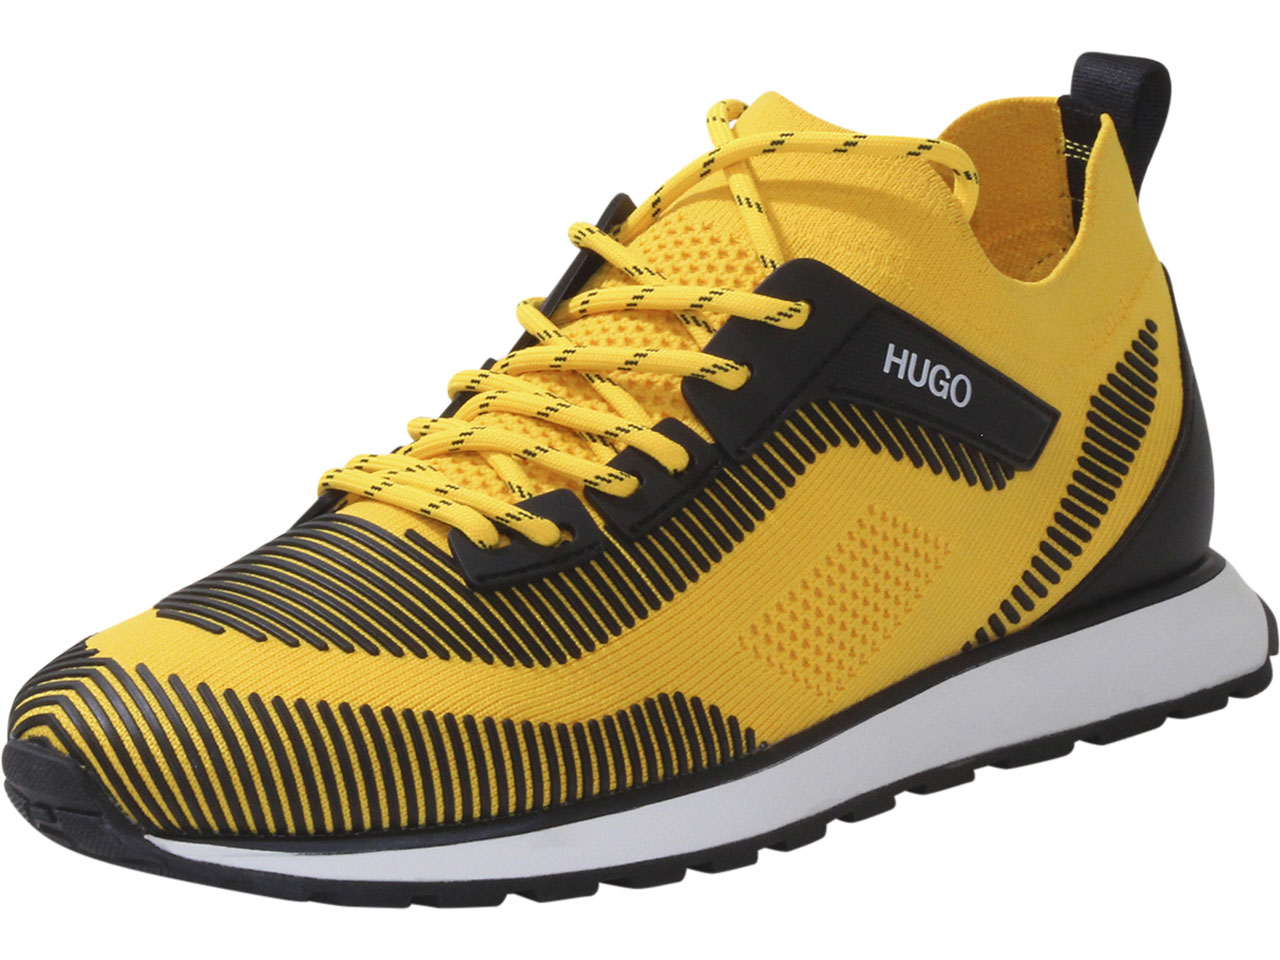 Hugo Boss Saturn Lowp Leather Mens Sneakers Shoes India | Ubuy